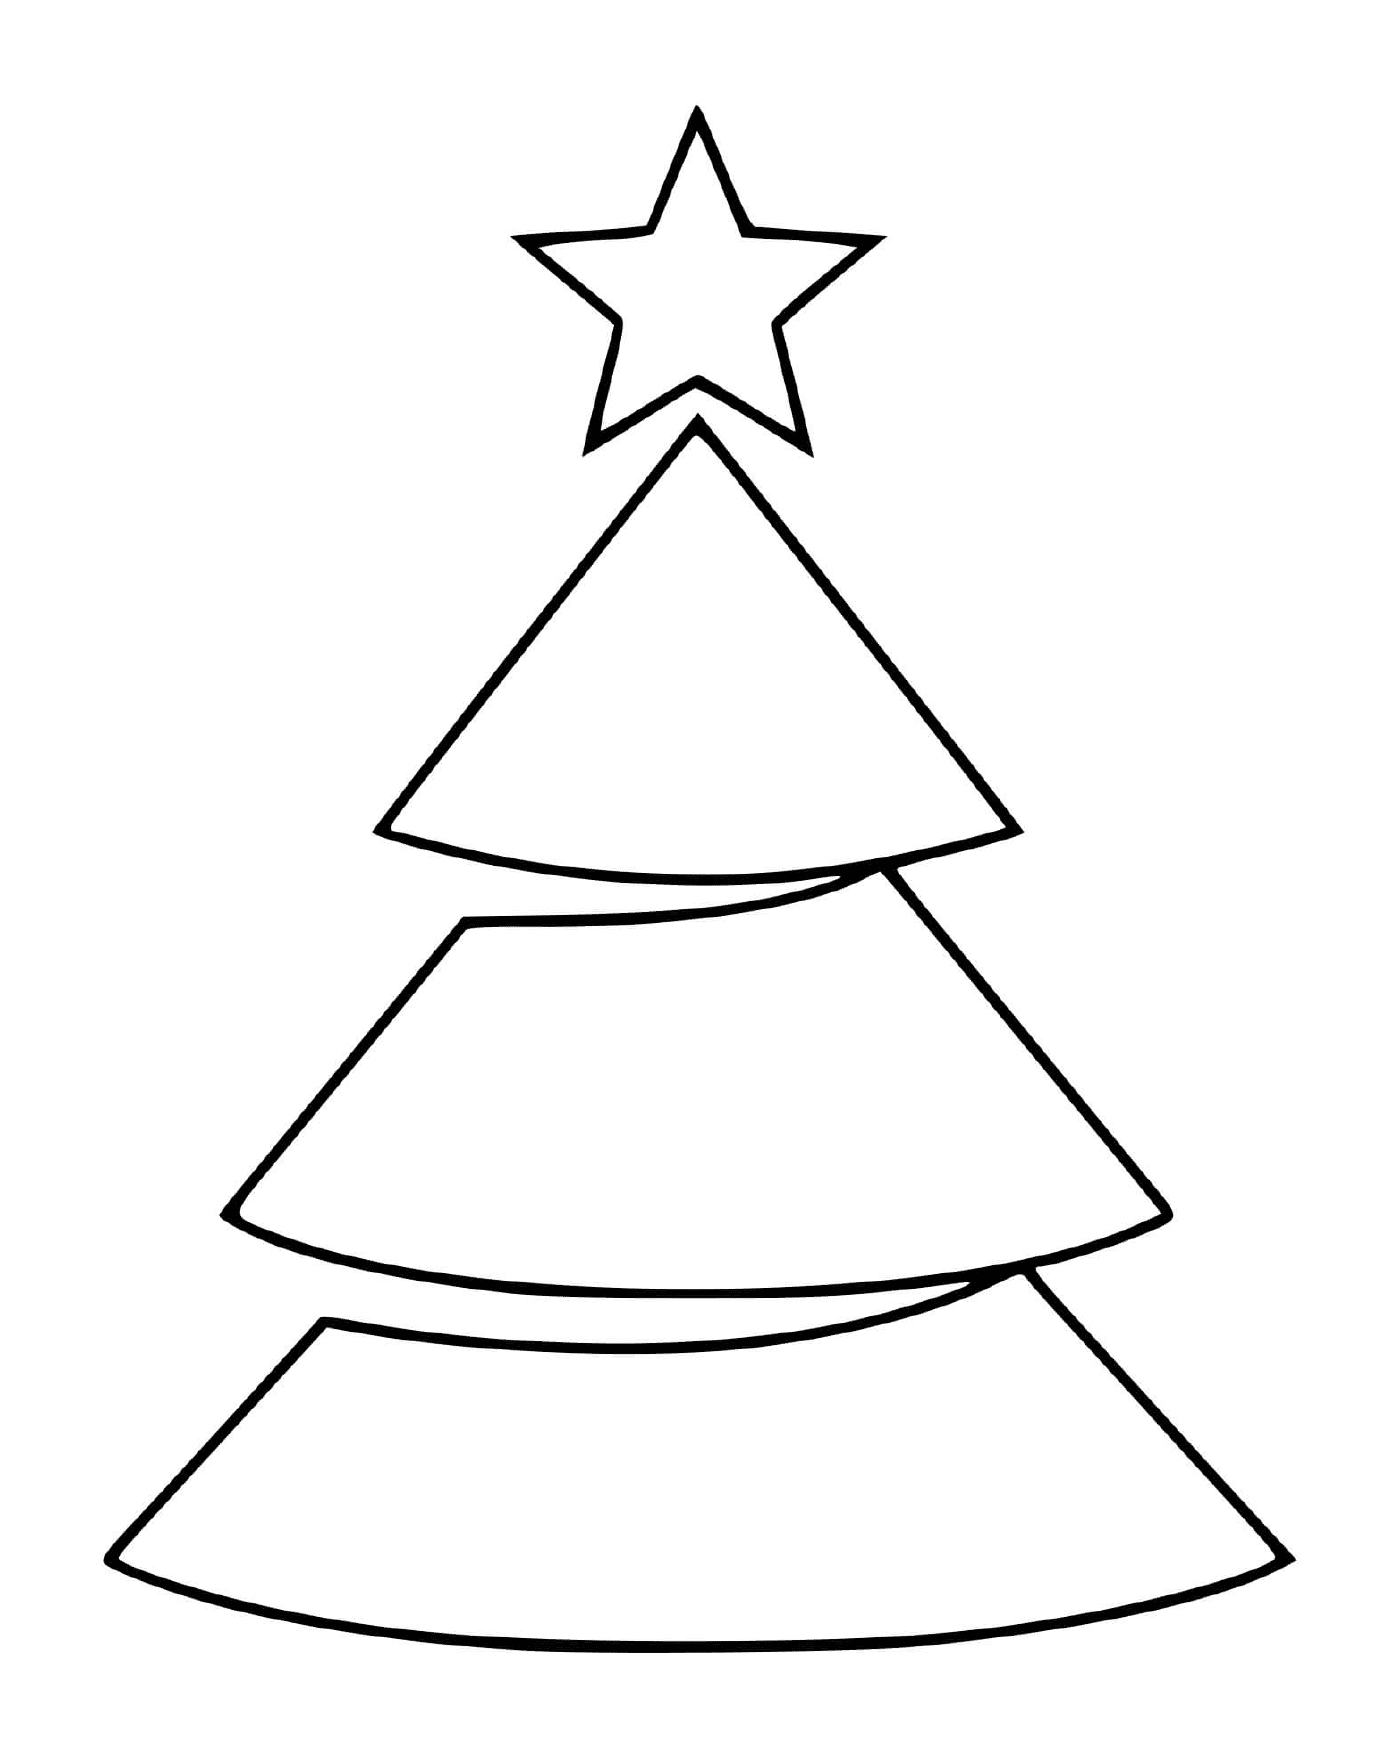  Simple tree with easy star 